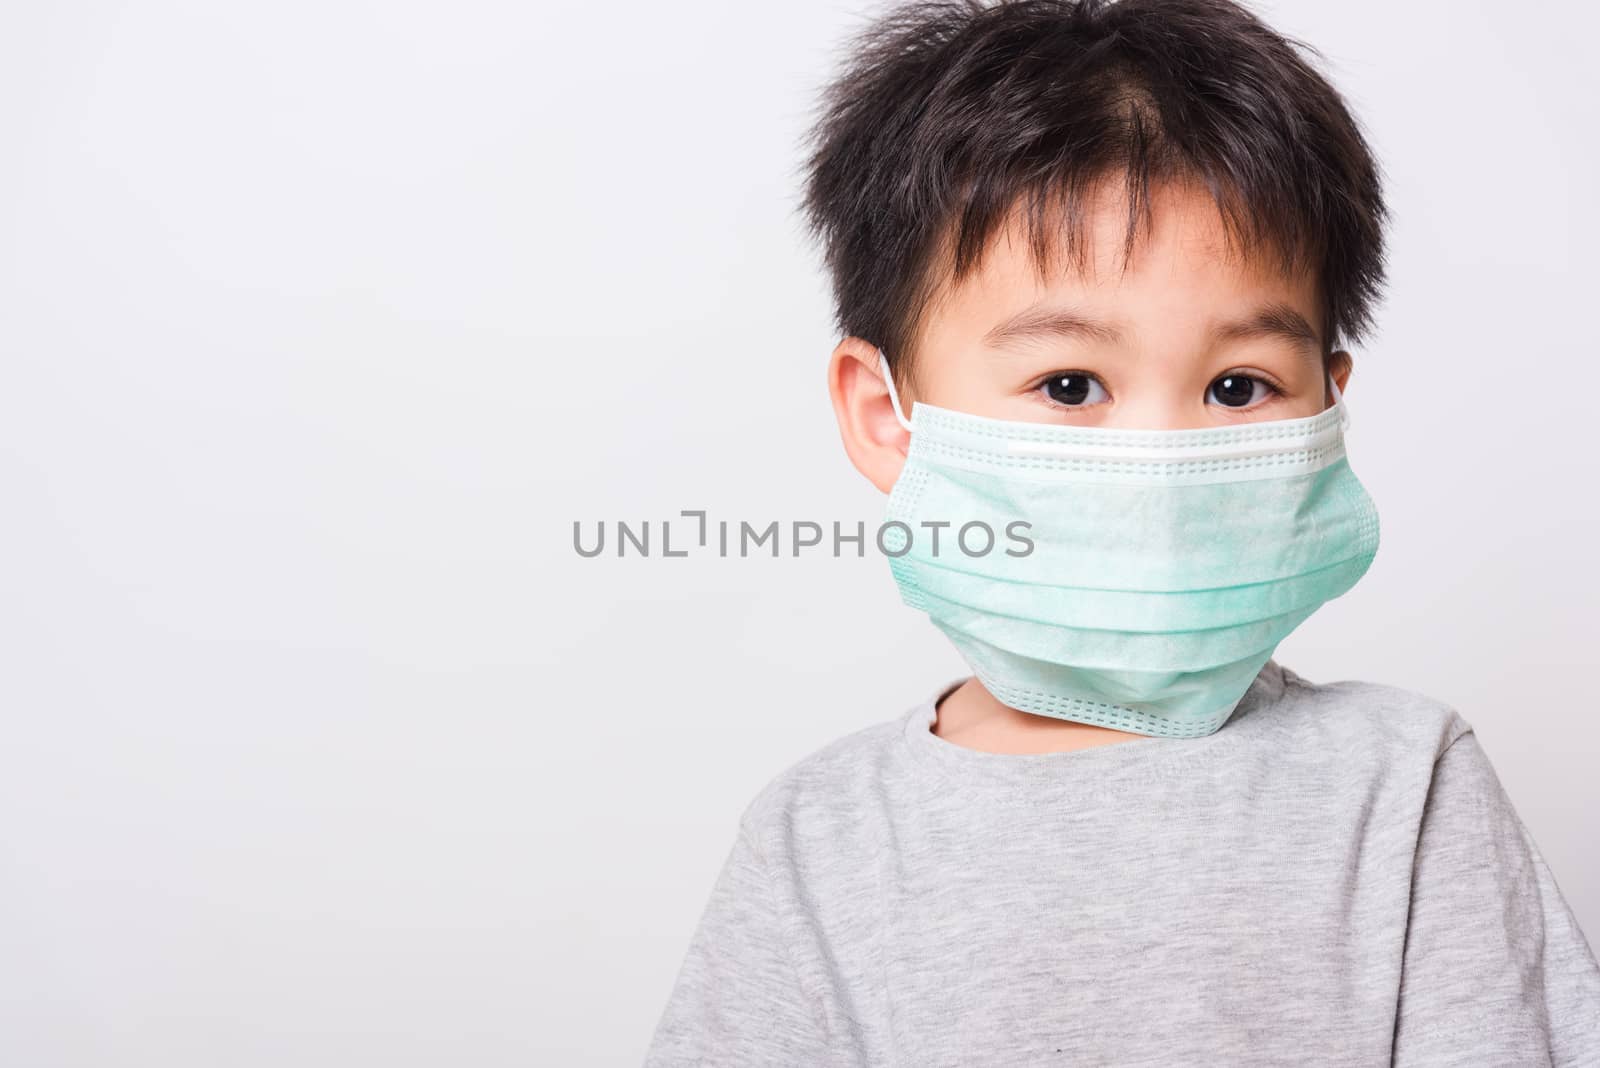 Closeup Asian face, Little children boy sick he using medicine healthcare mask on white background with copy space, health medical care